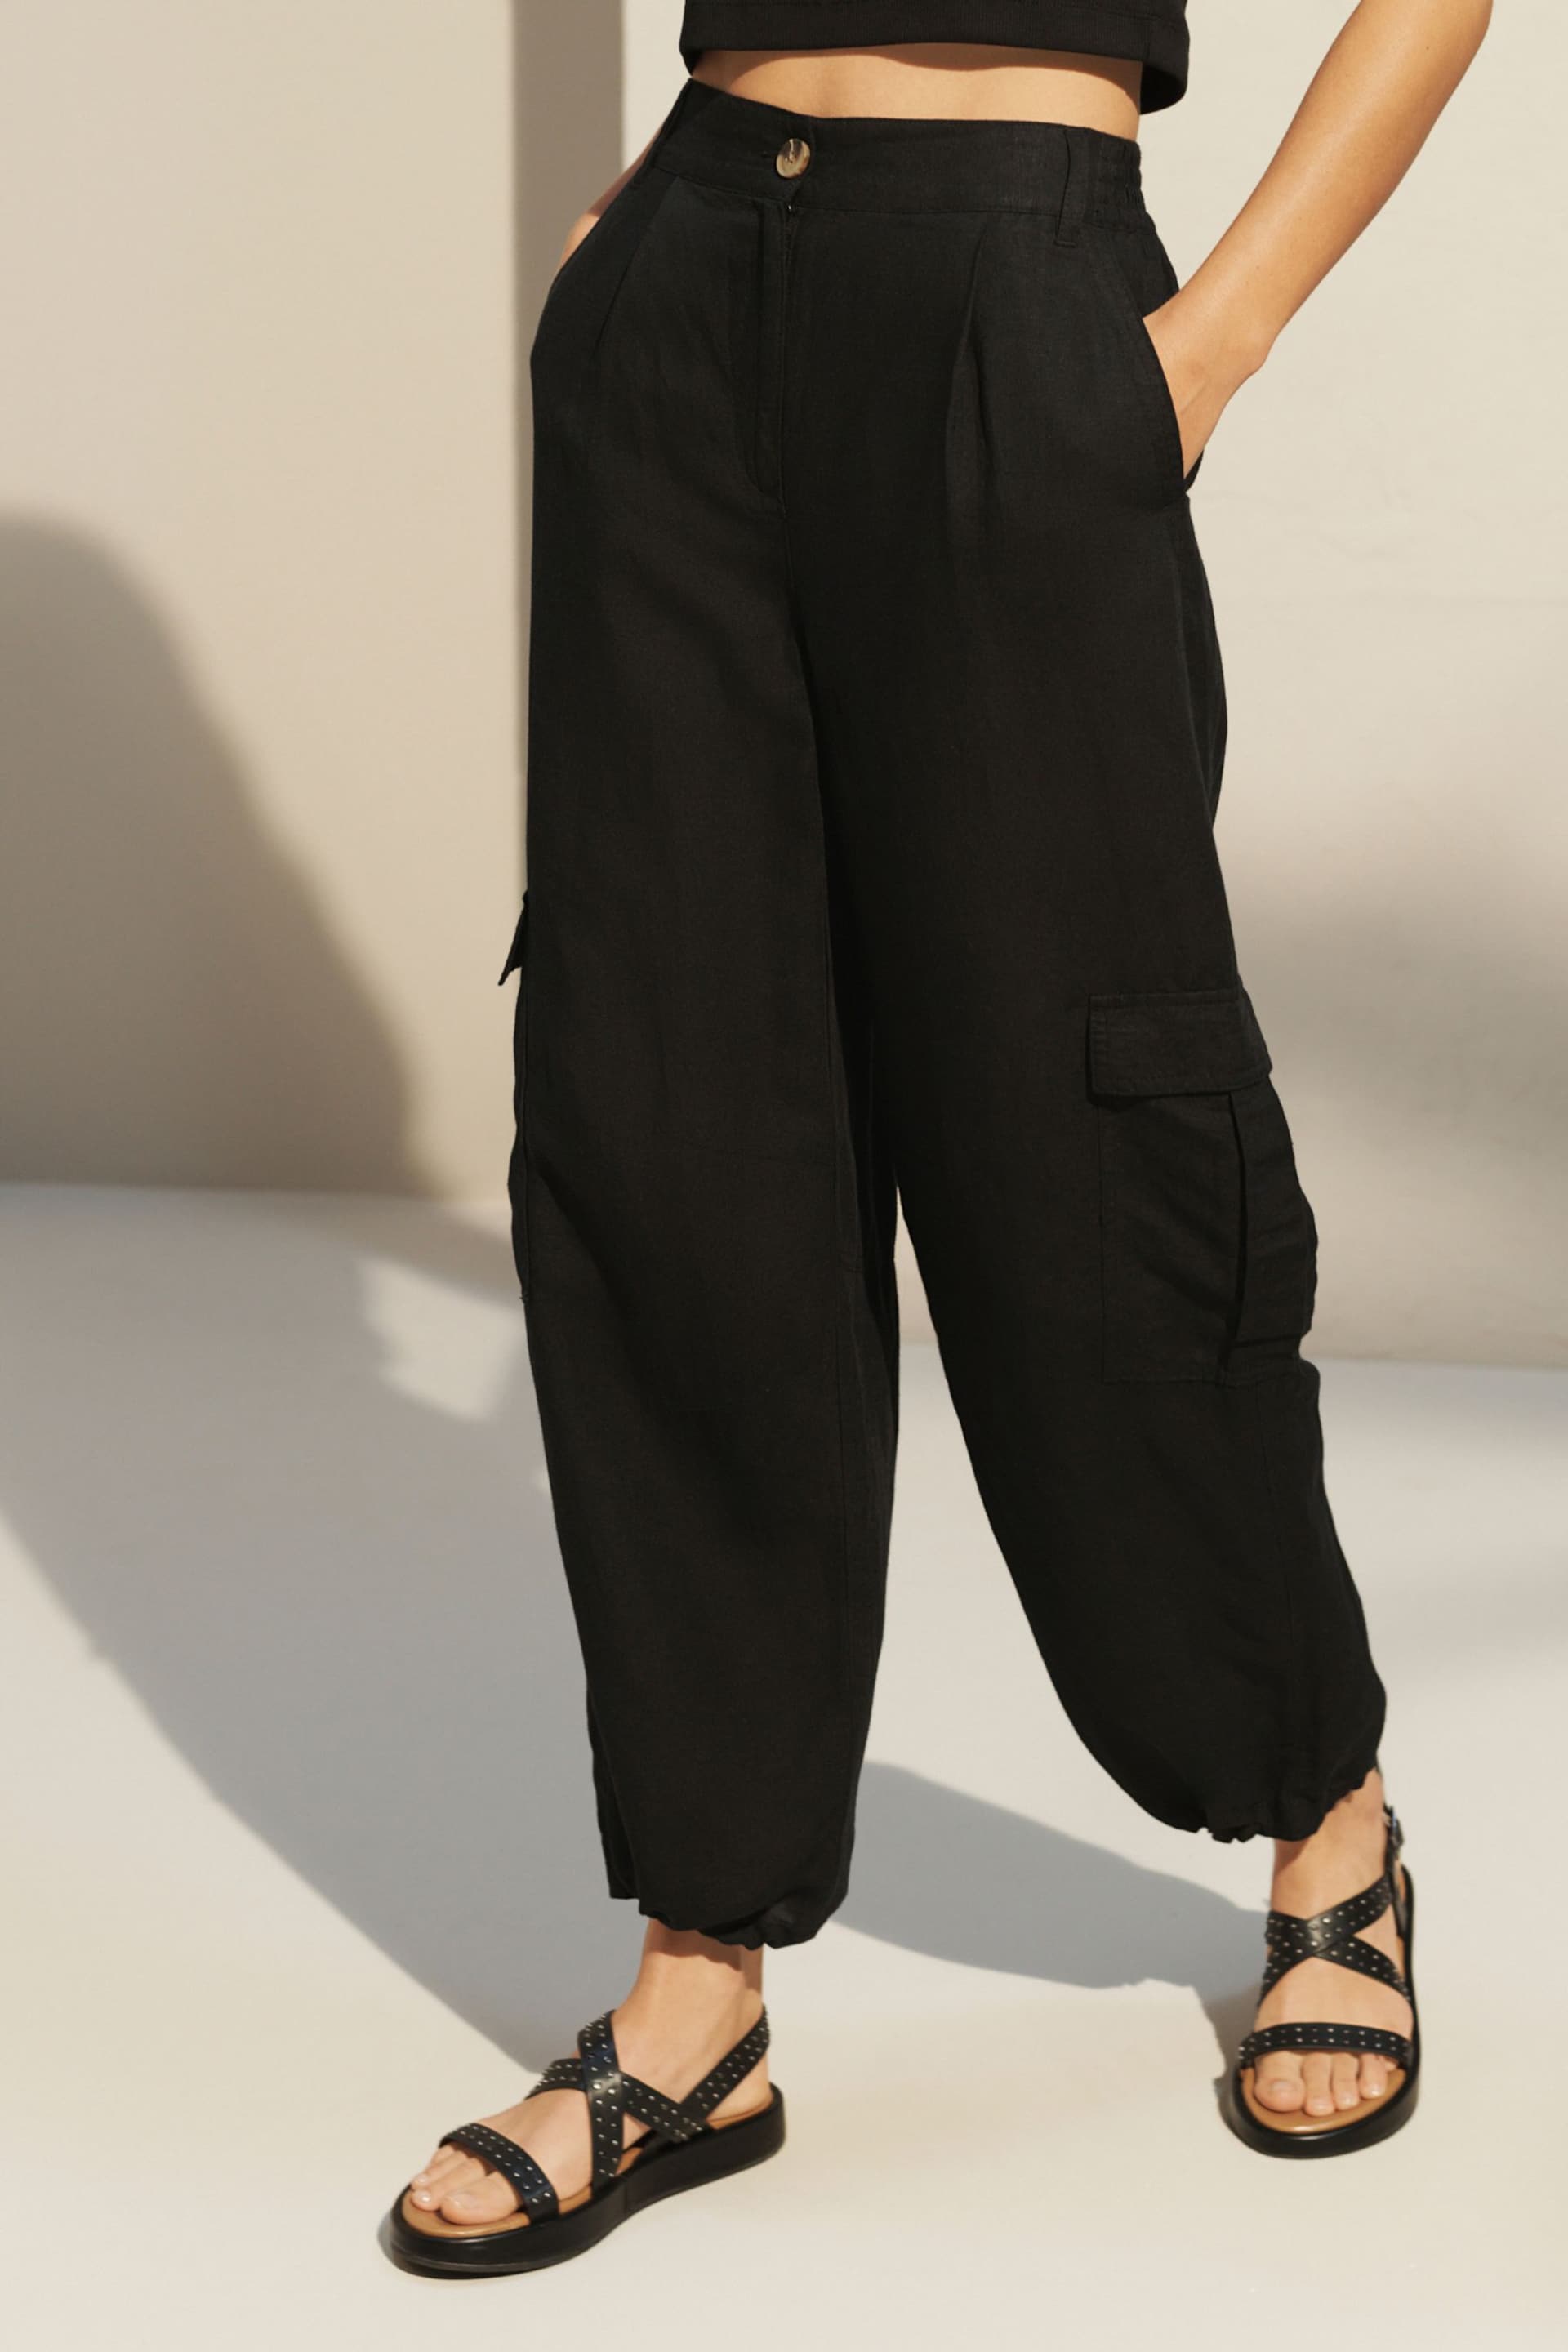 Black Linen Blend Cargo Trousers - Image 3 of 7